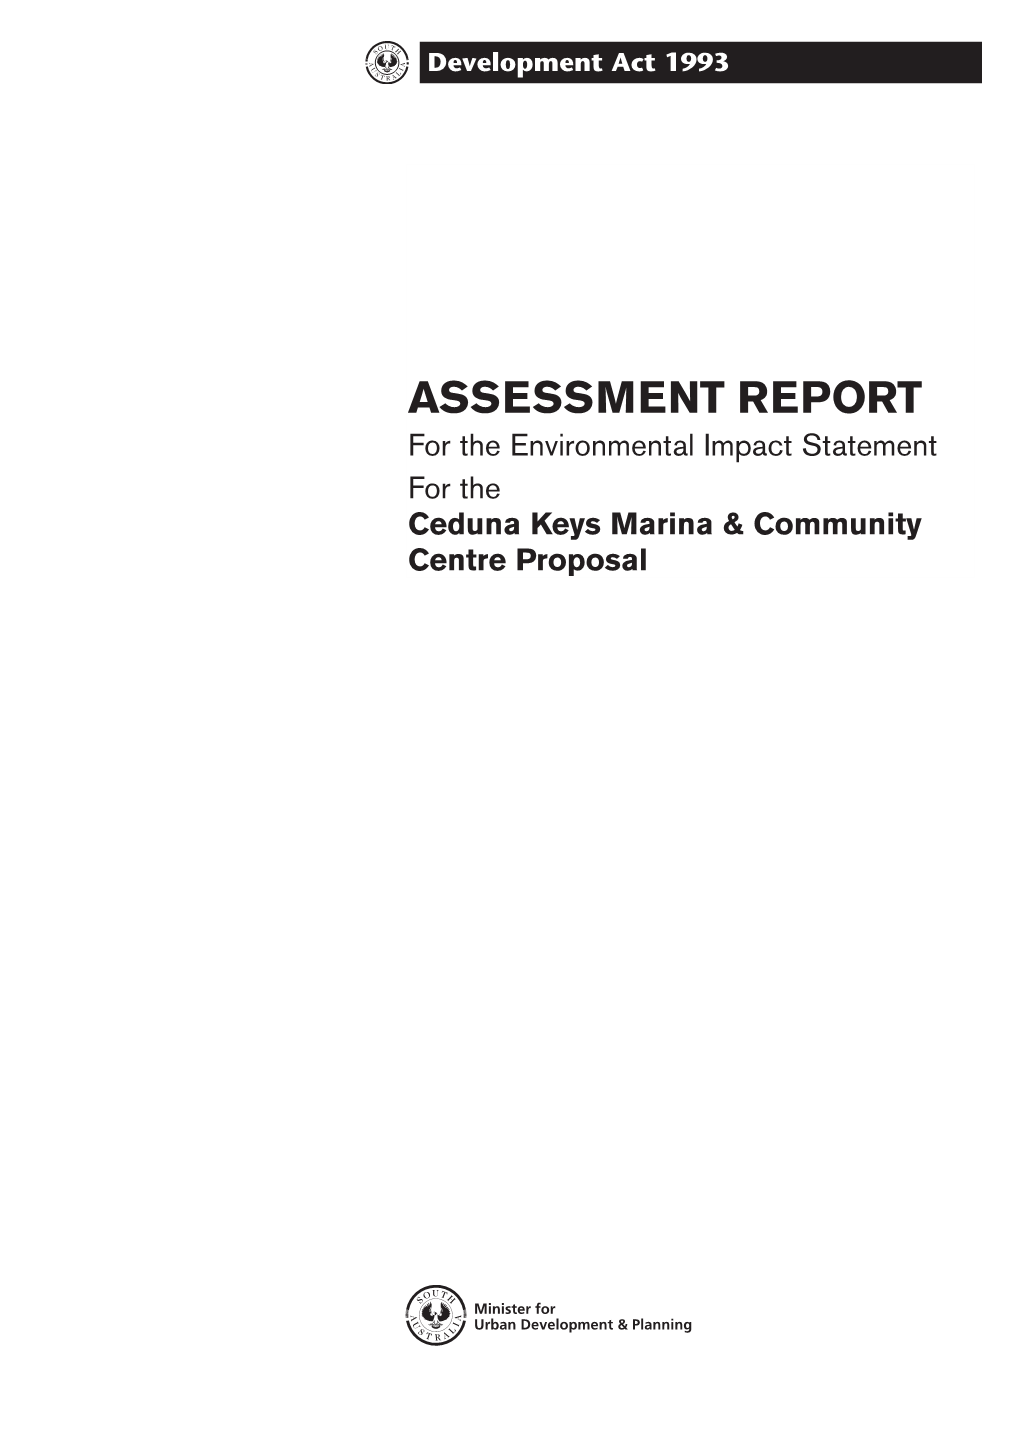 ASSESSMENT REPORT for the Environmental Impact Statement for the Ceduna Keys Marina & Community Centre Proposal